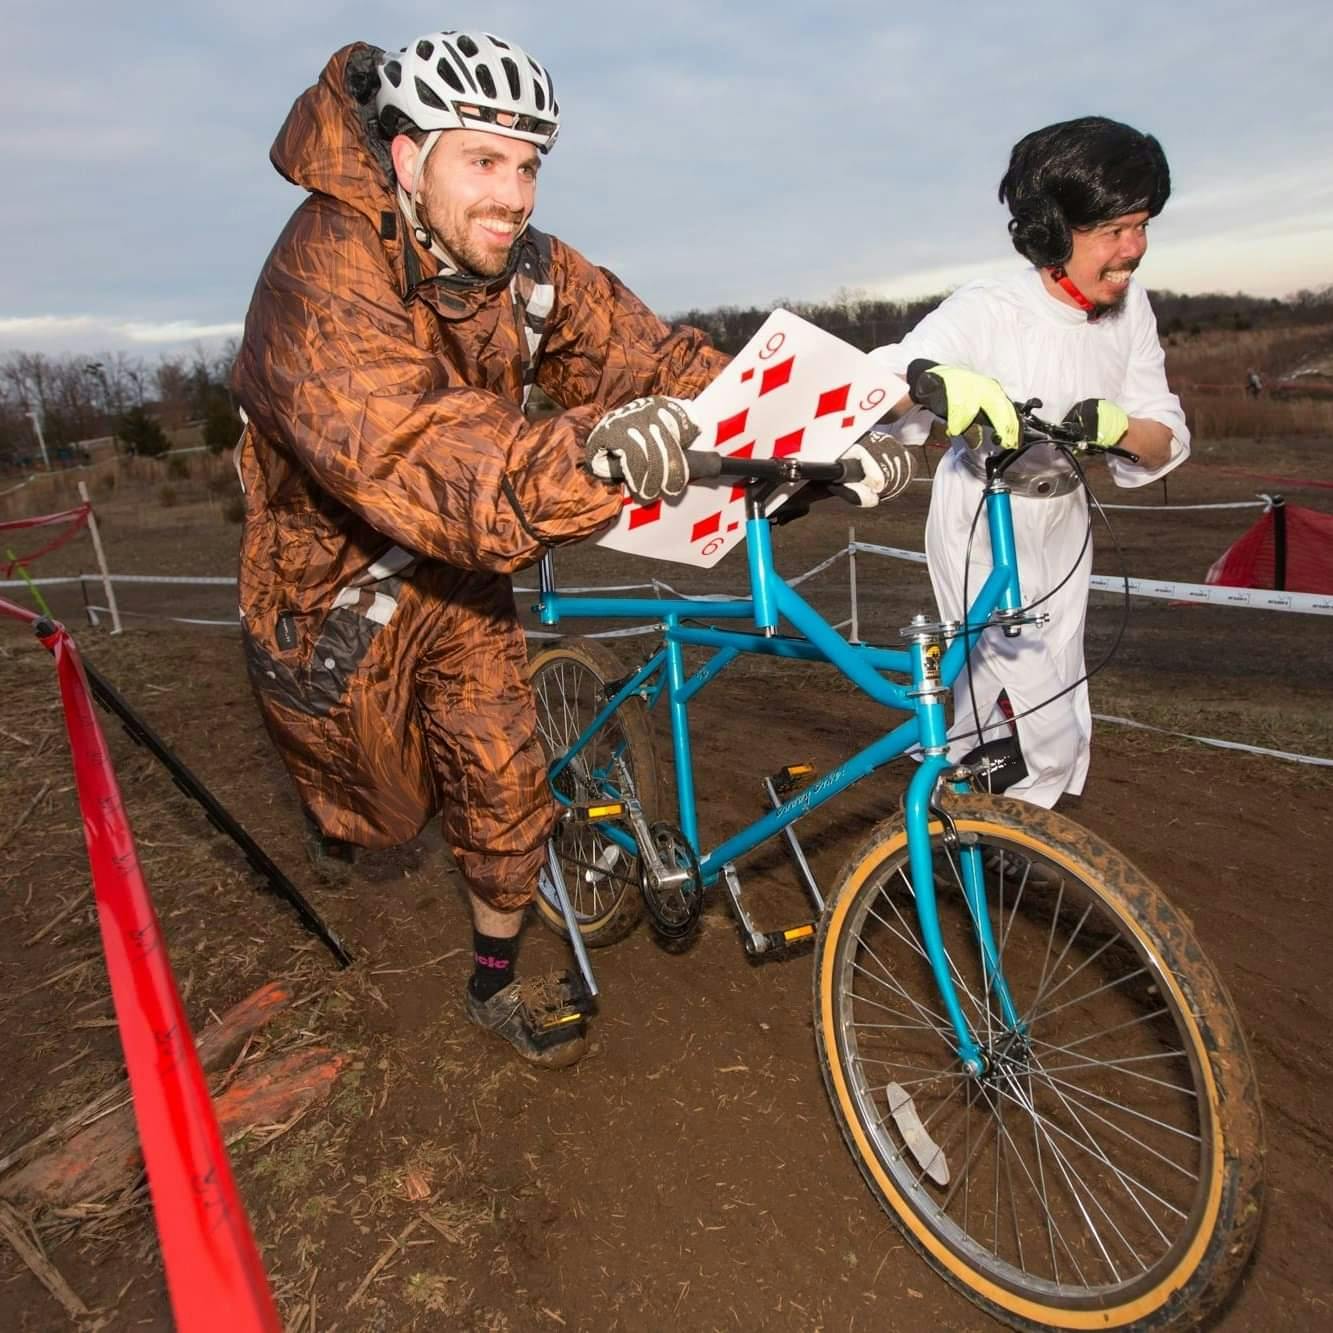 Side-by-side tandem races CX